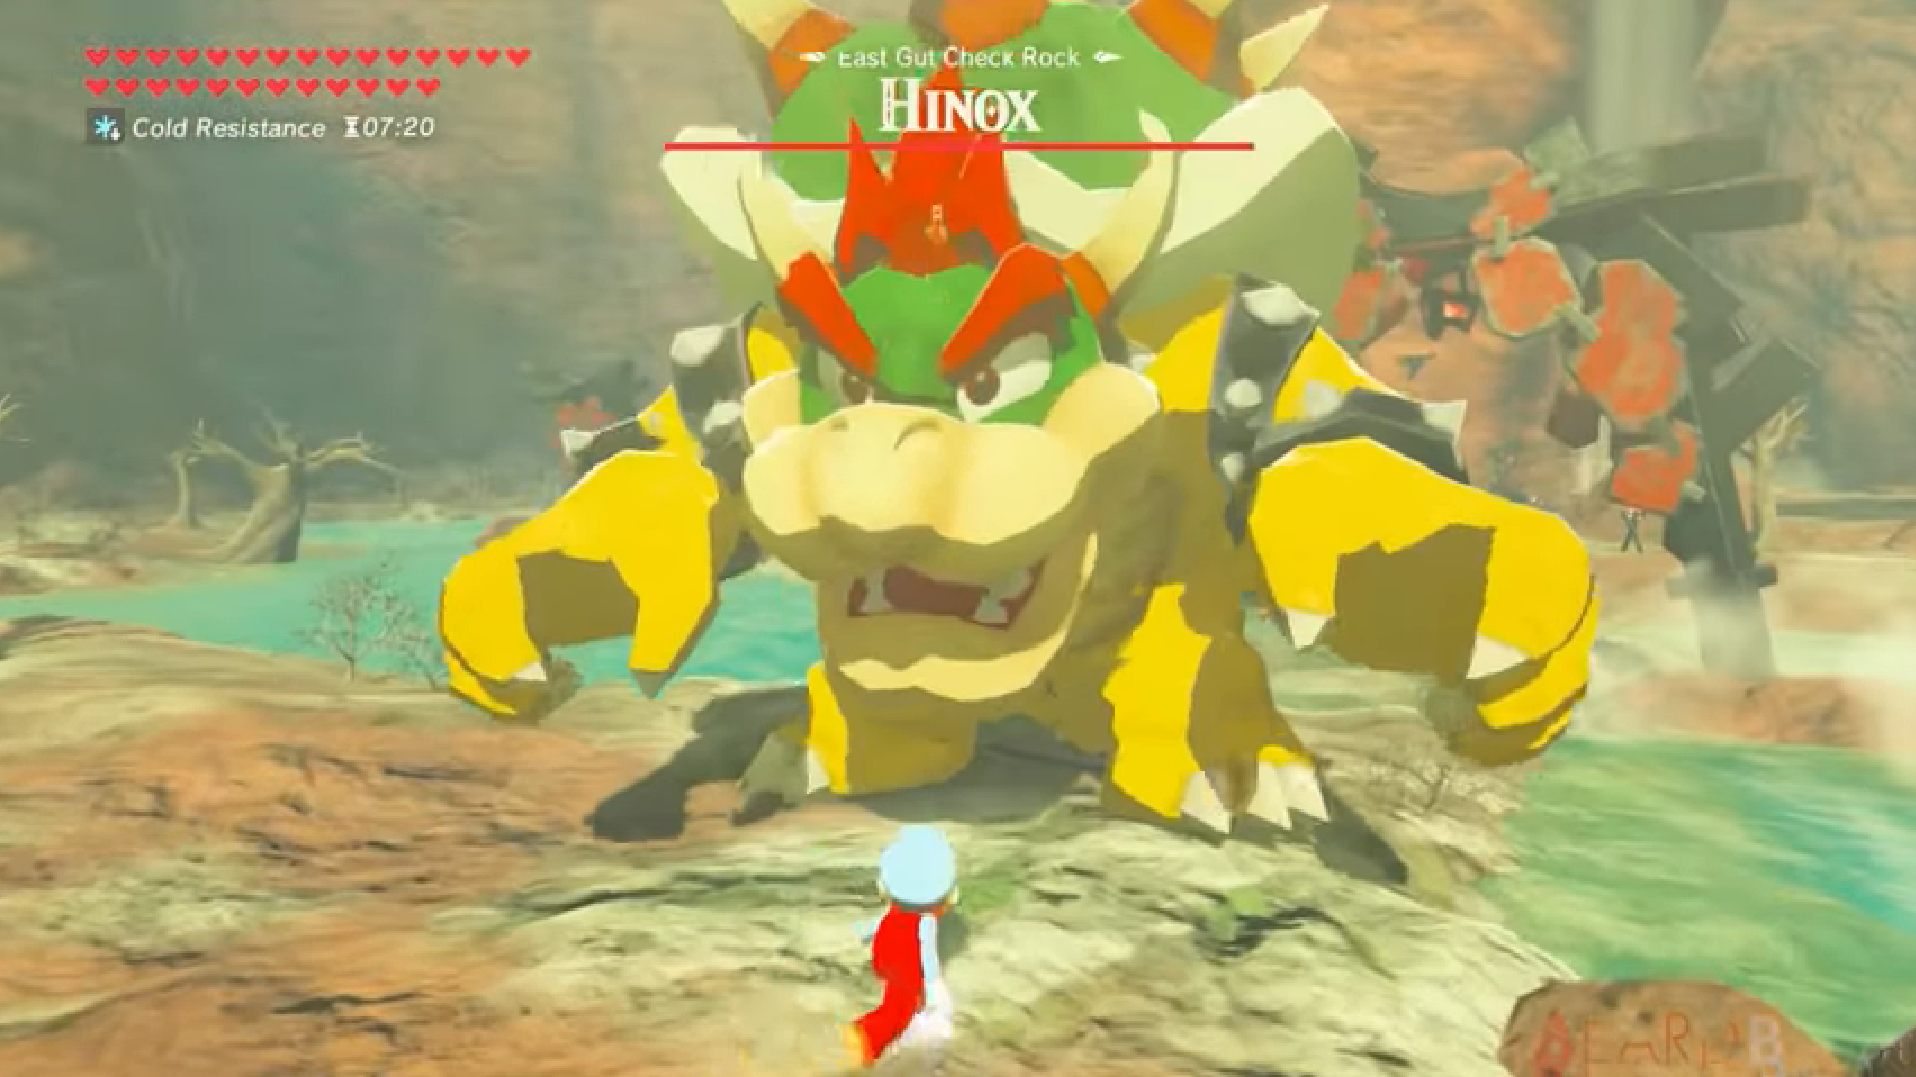 New Zelda: Breath of the Wild mod lets you battle Bowser as Mario